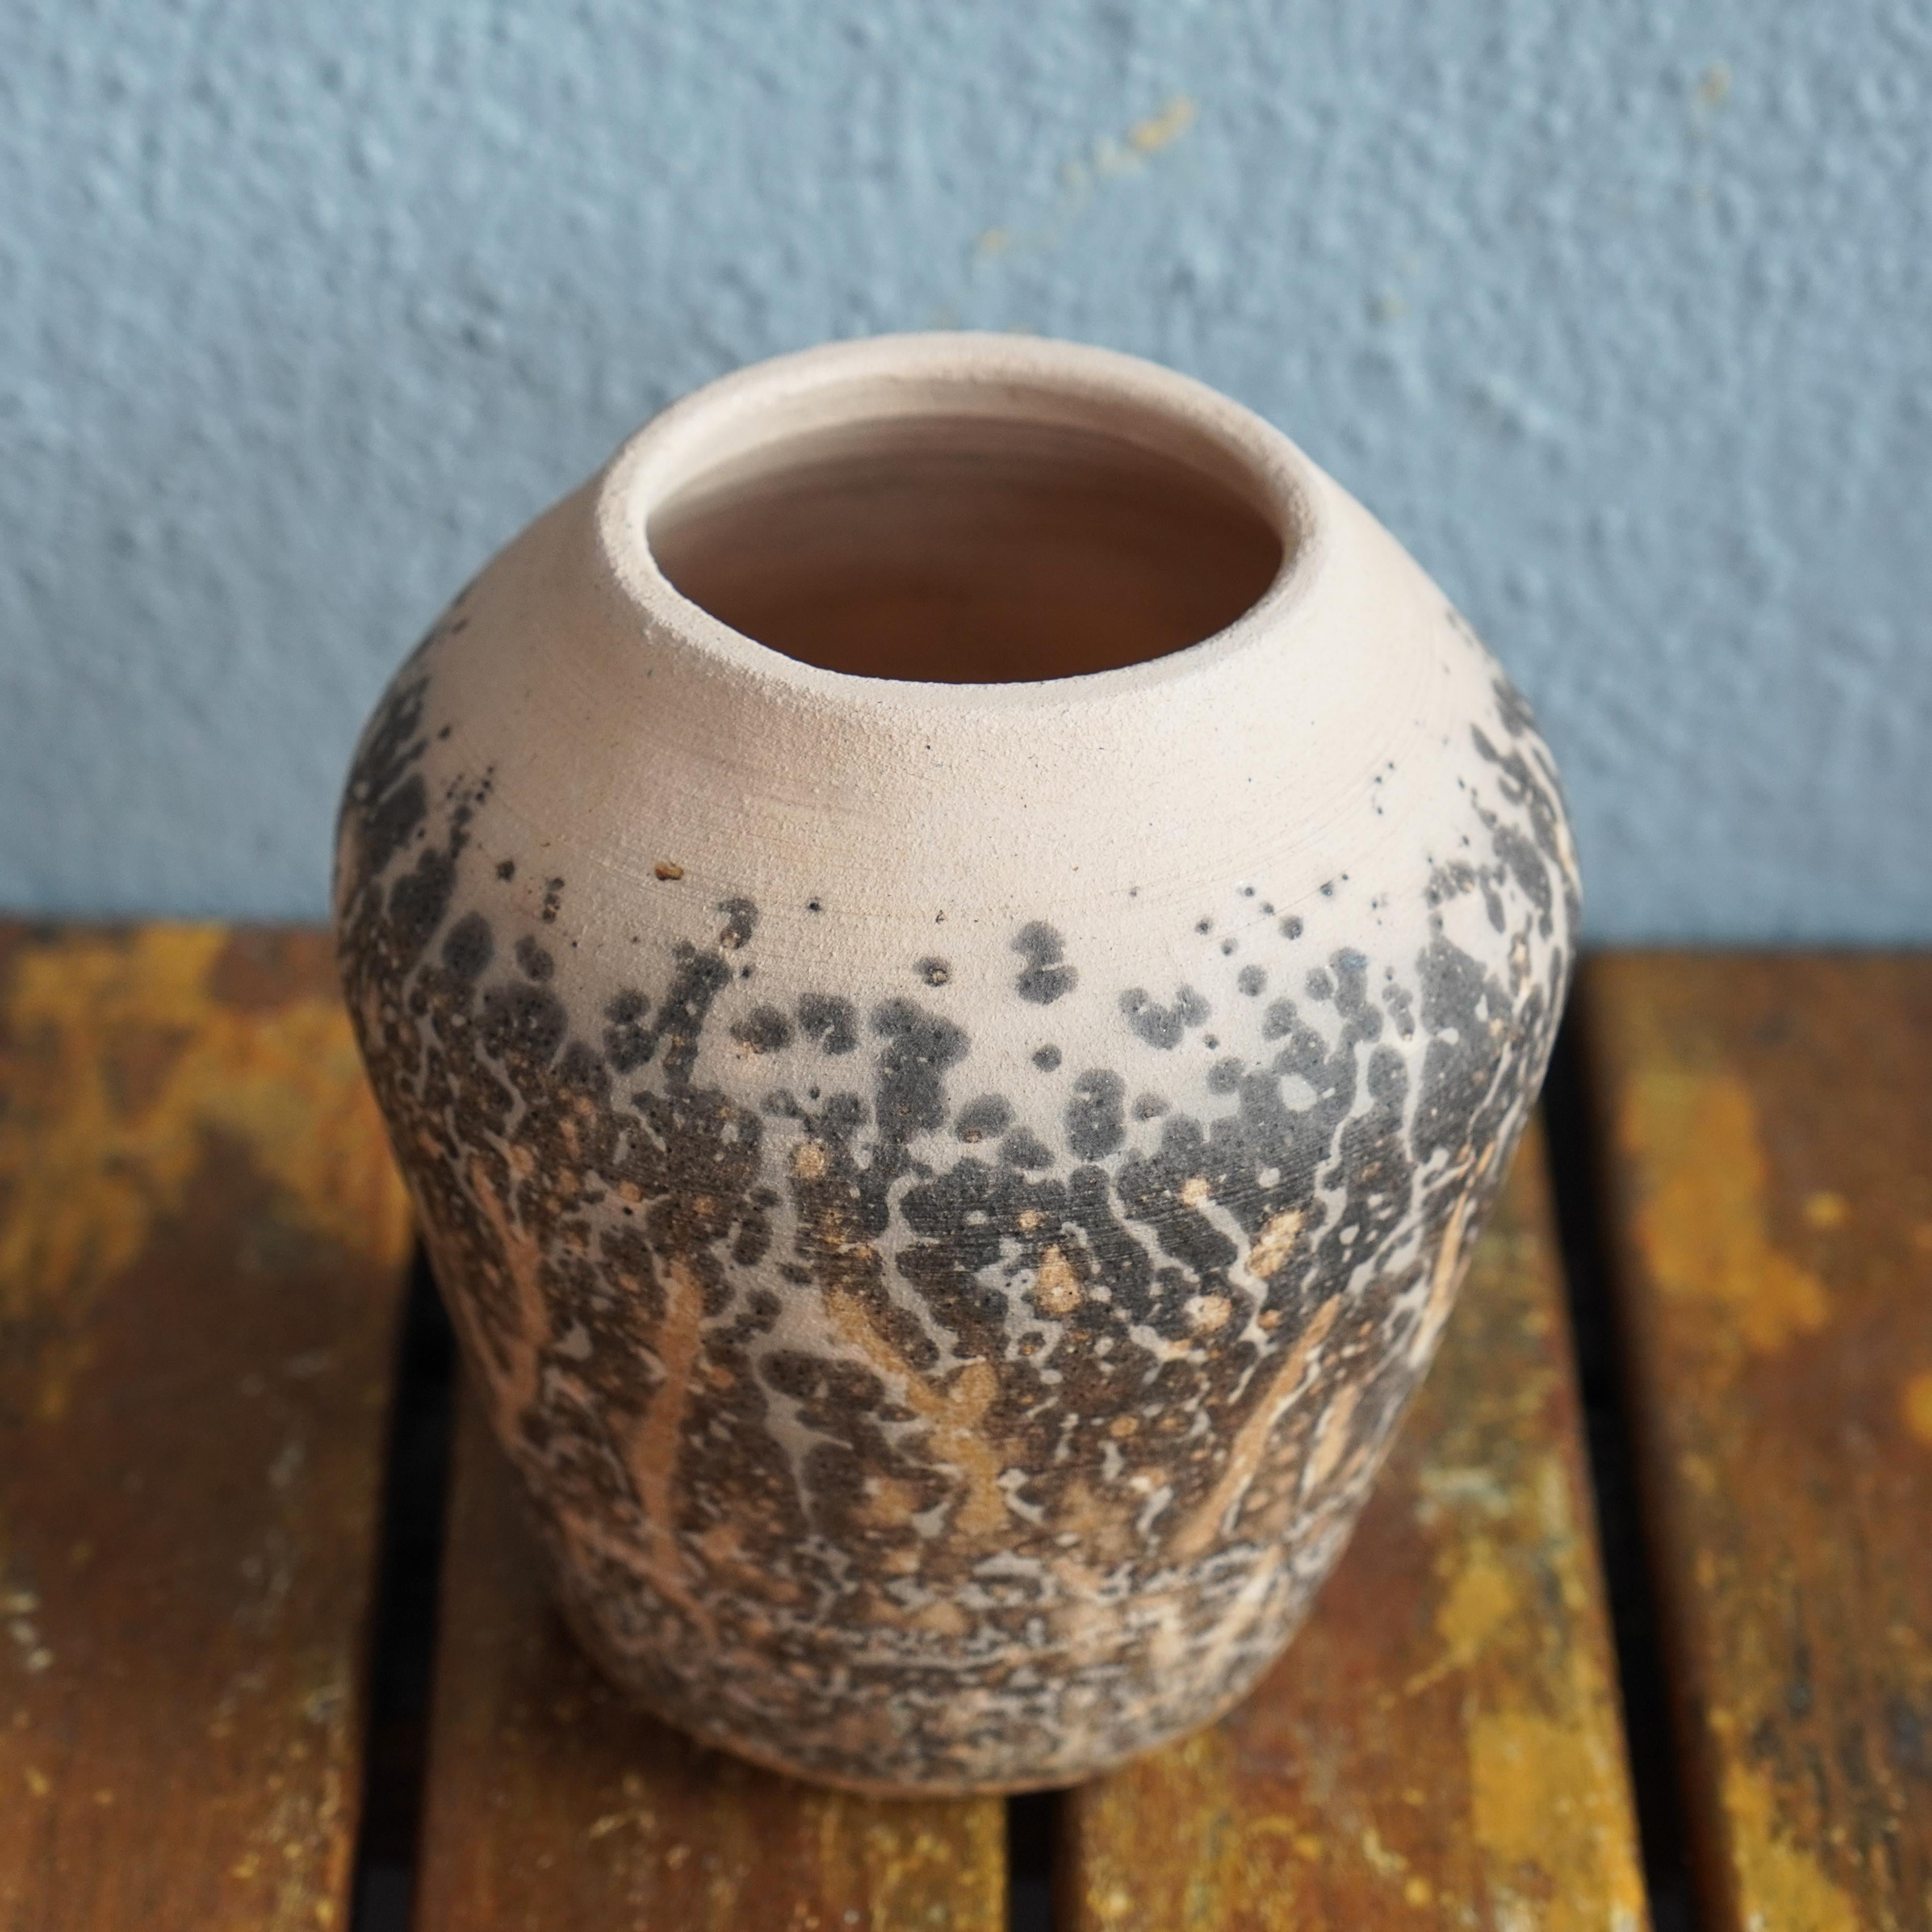 Hoseki (宝石) ~ (n) gem

The Hoseki Vase is named “gem” in Japanese for its slightly angular shape. Wide-mouthed with a textured finish and soft edges, it adds a classy touch to any décor style.

Best arranged together with other similar-sized vases